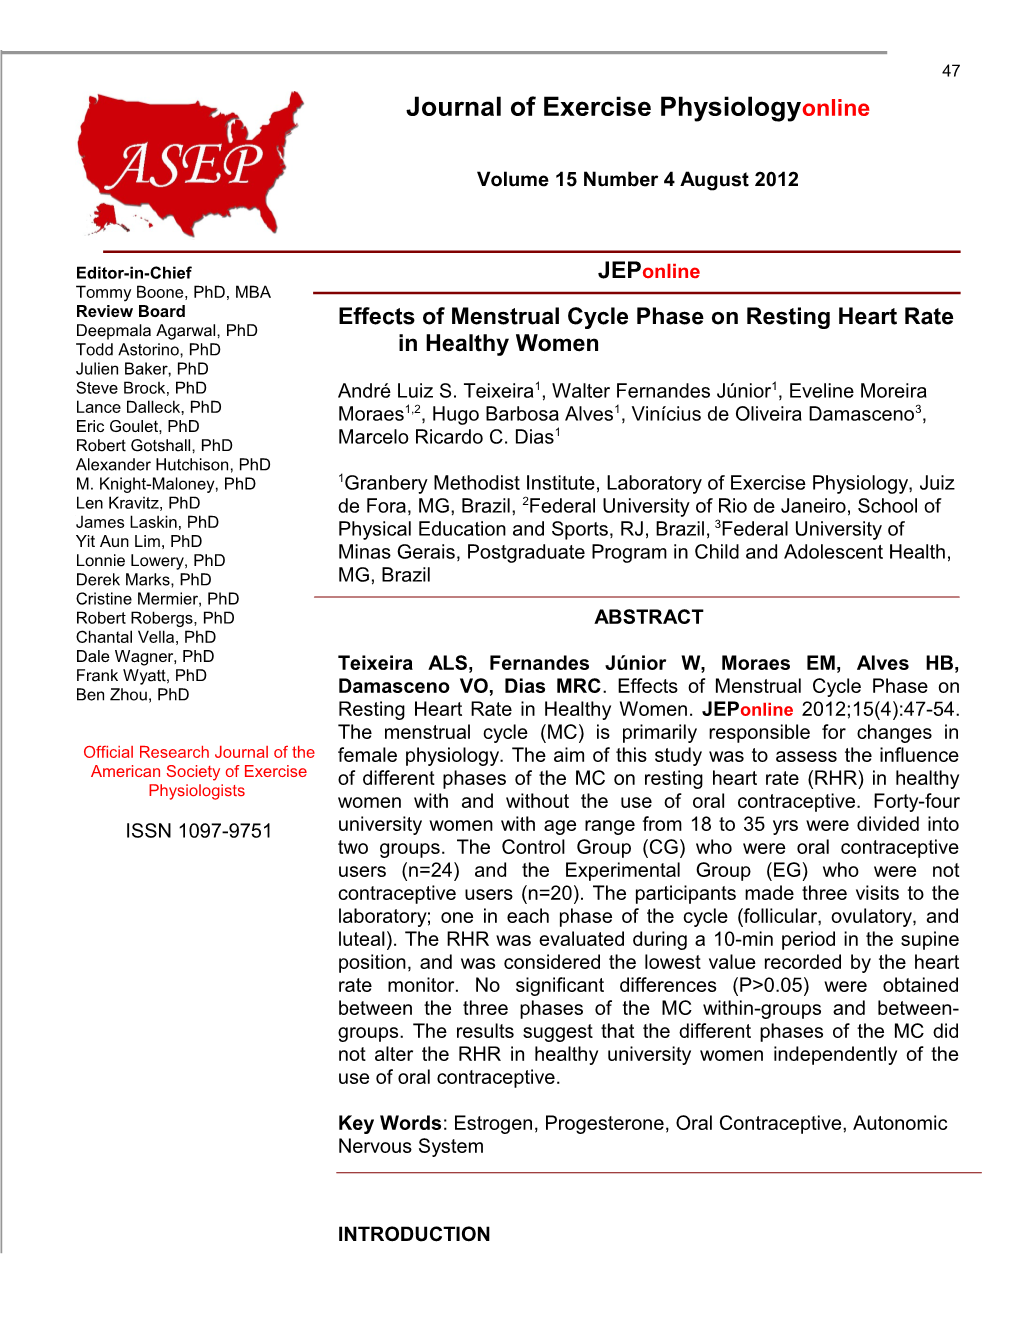 Effects of Menstrual Cycle Phase on Resting Heart Rate in Healthy Women